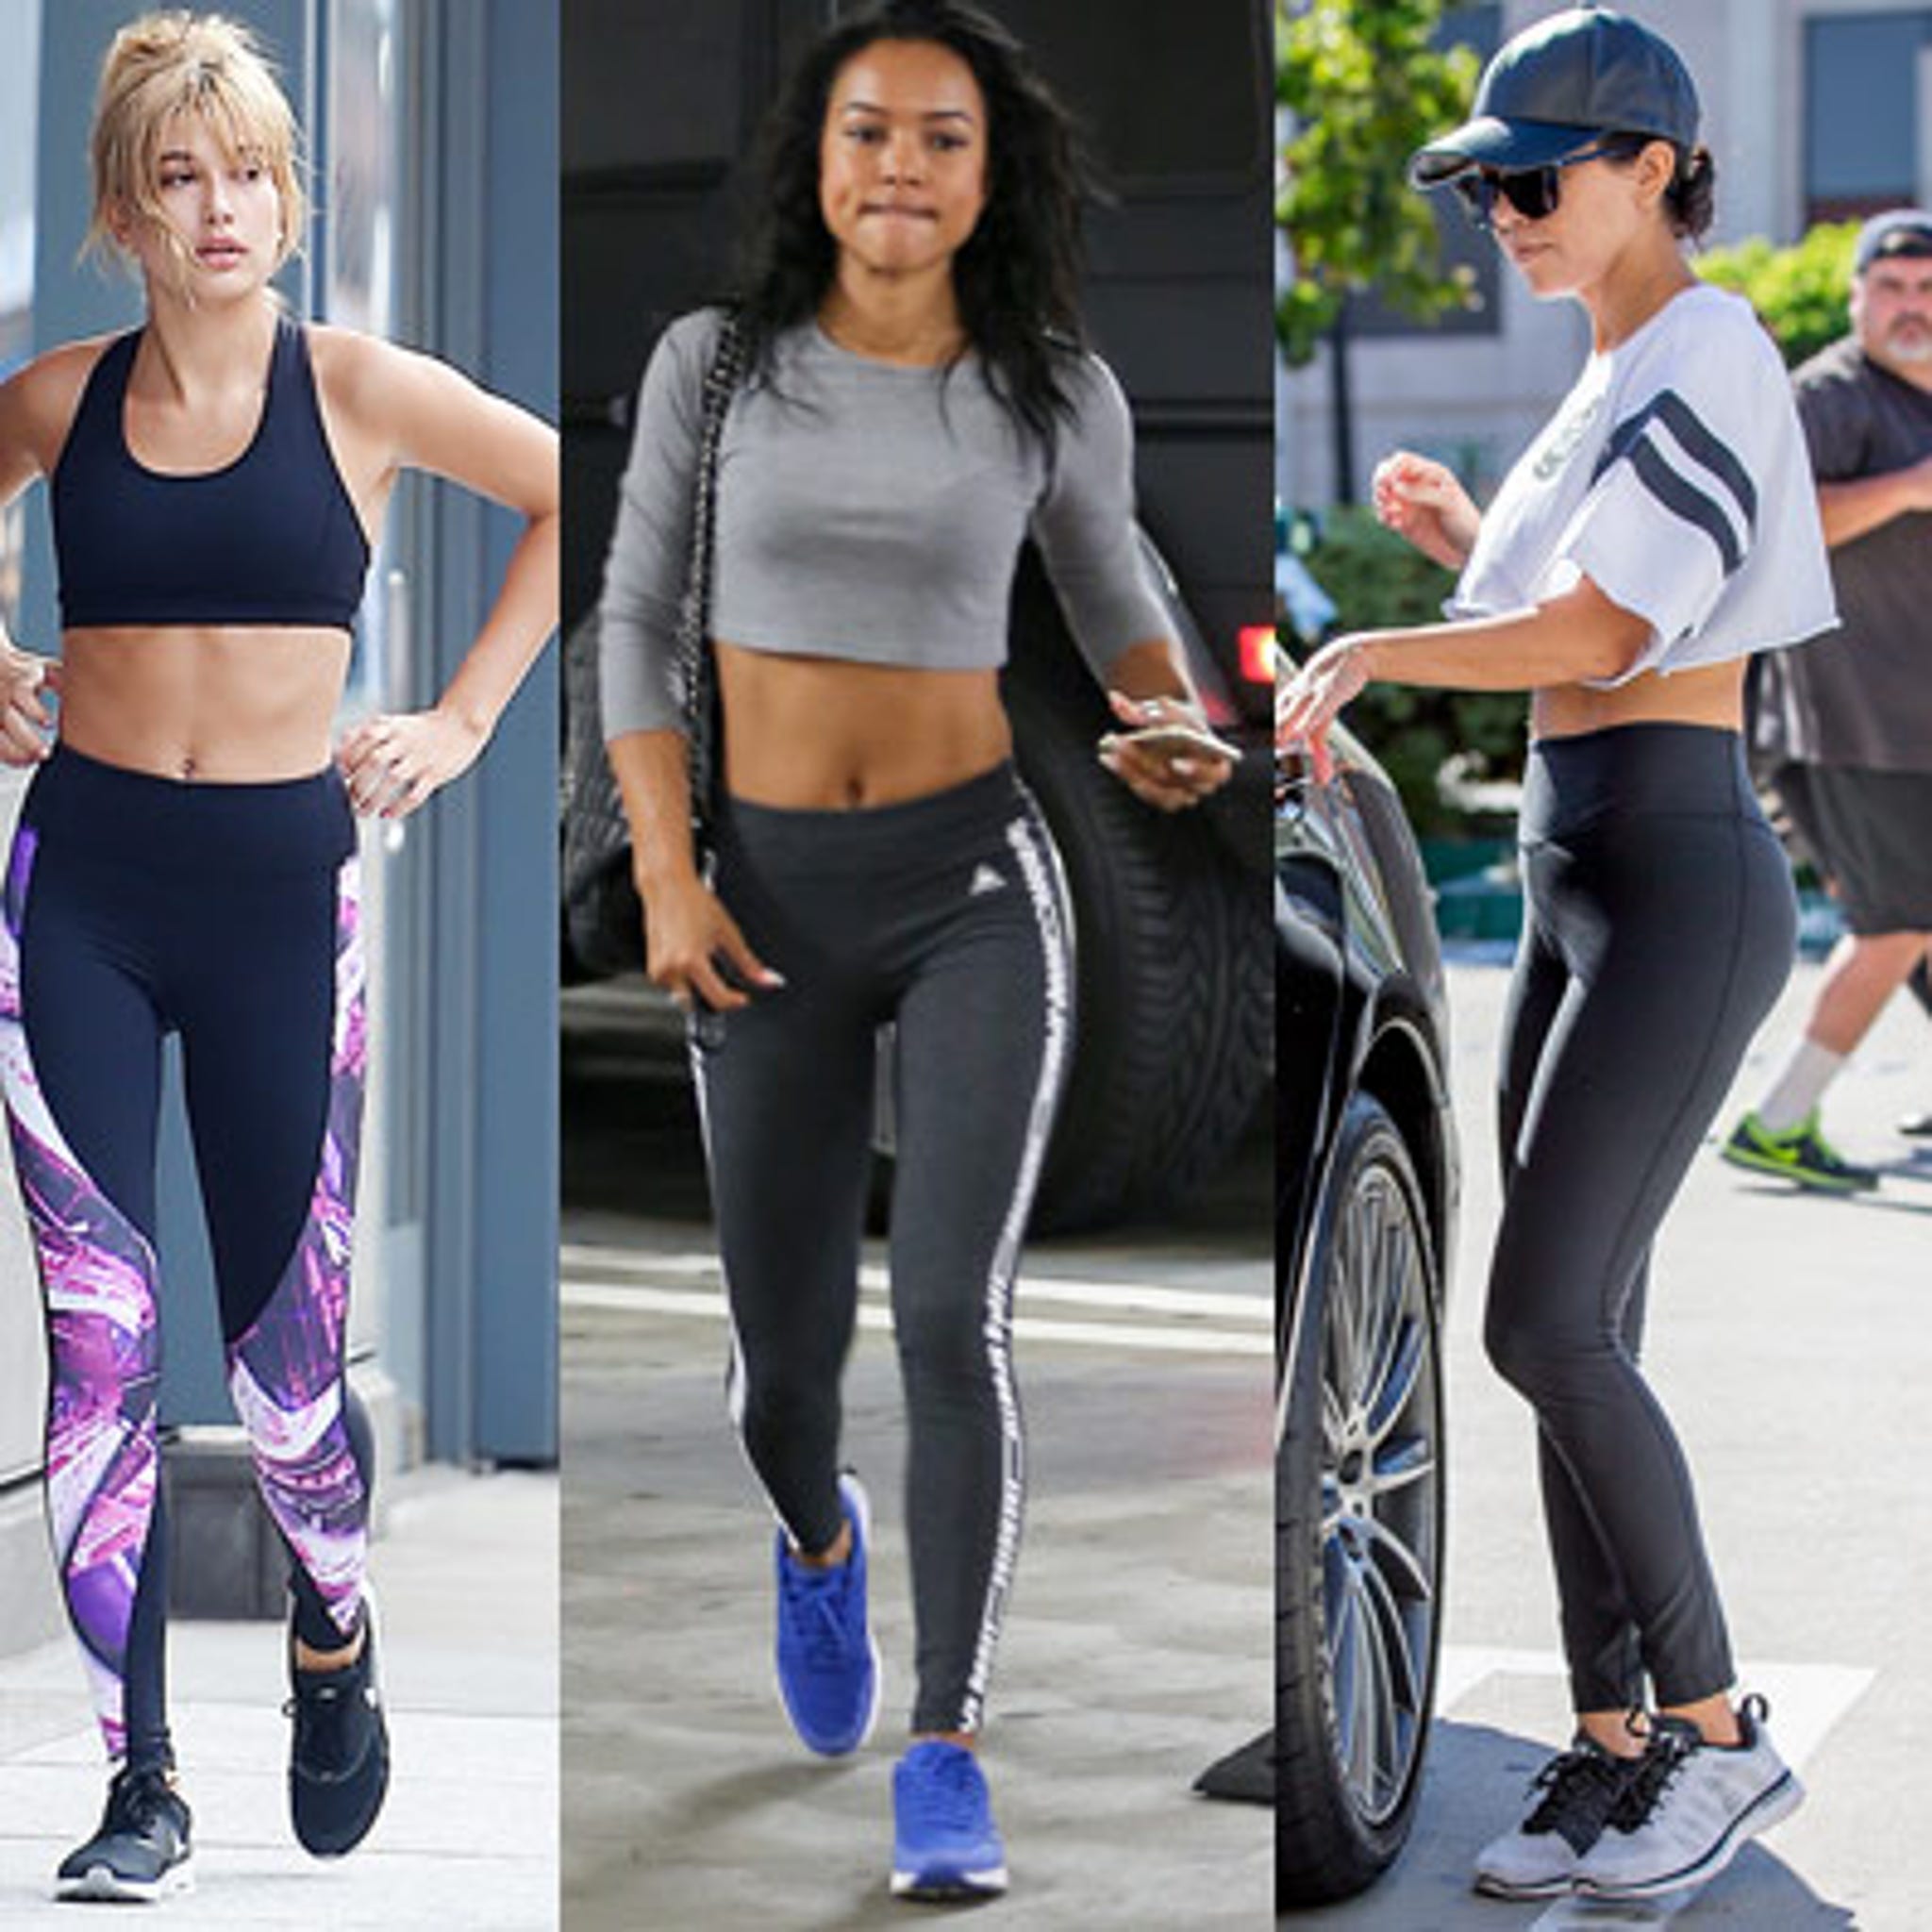 85 Photos Of Celebrities In Tights, Leggings And Spandex To